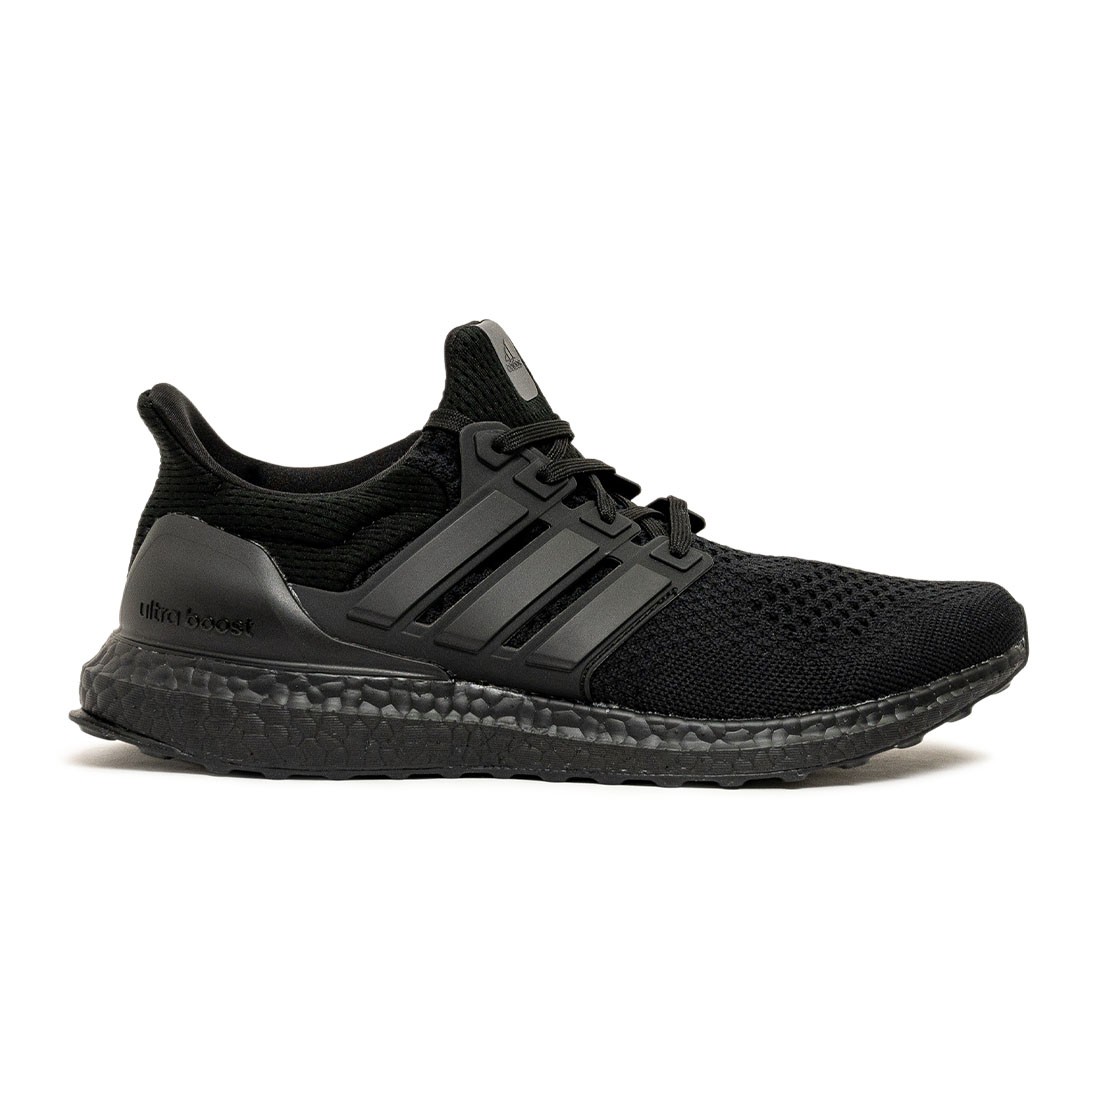 adidas caflaire grey trainers for boys shoes sale